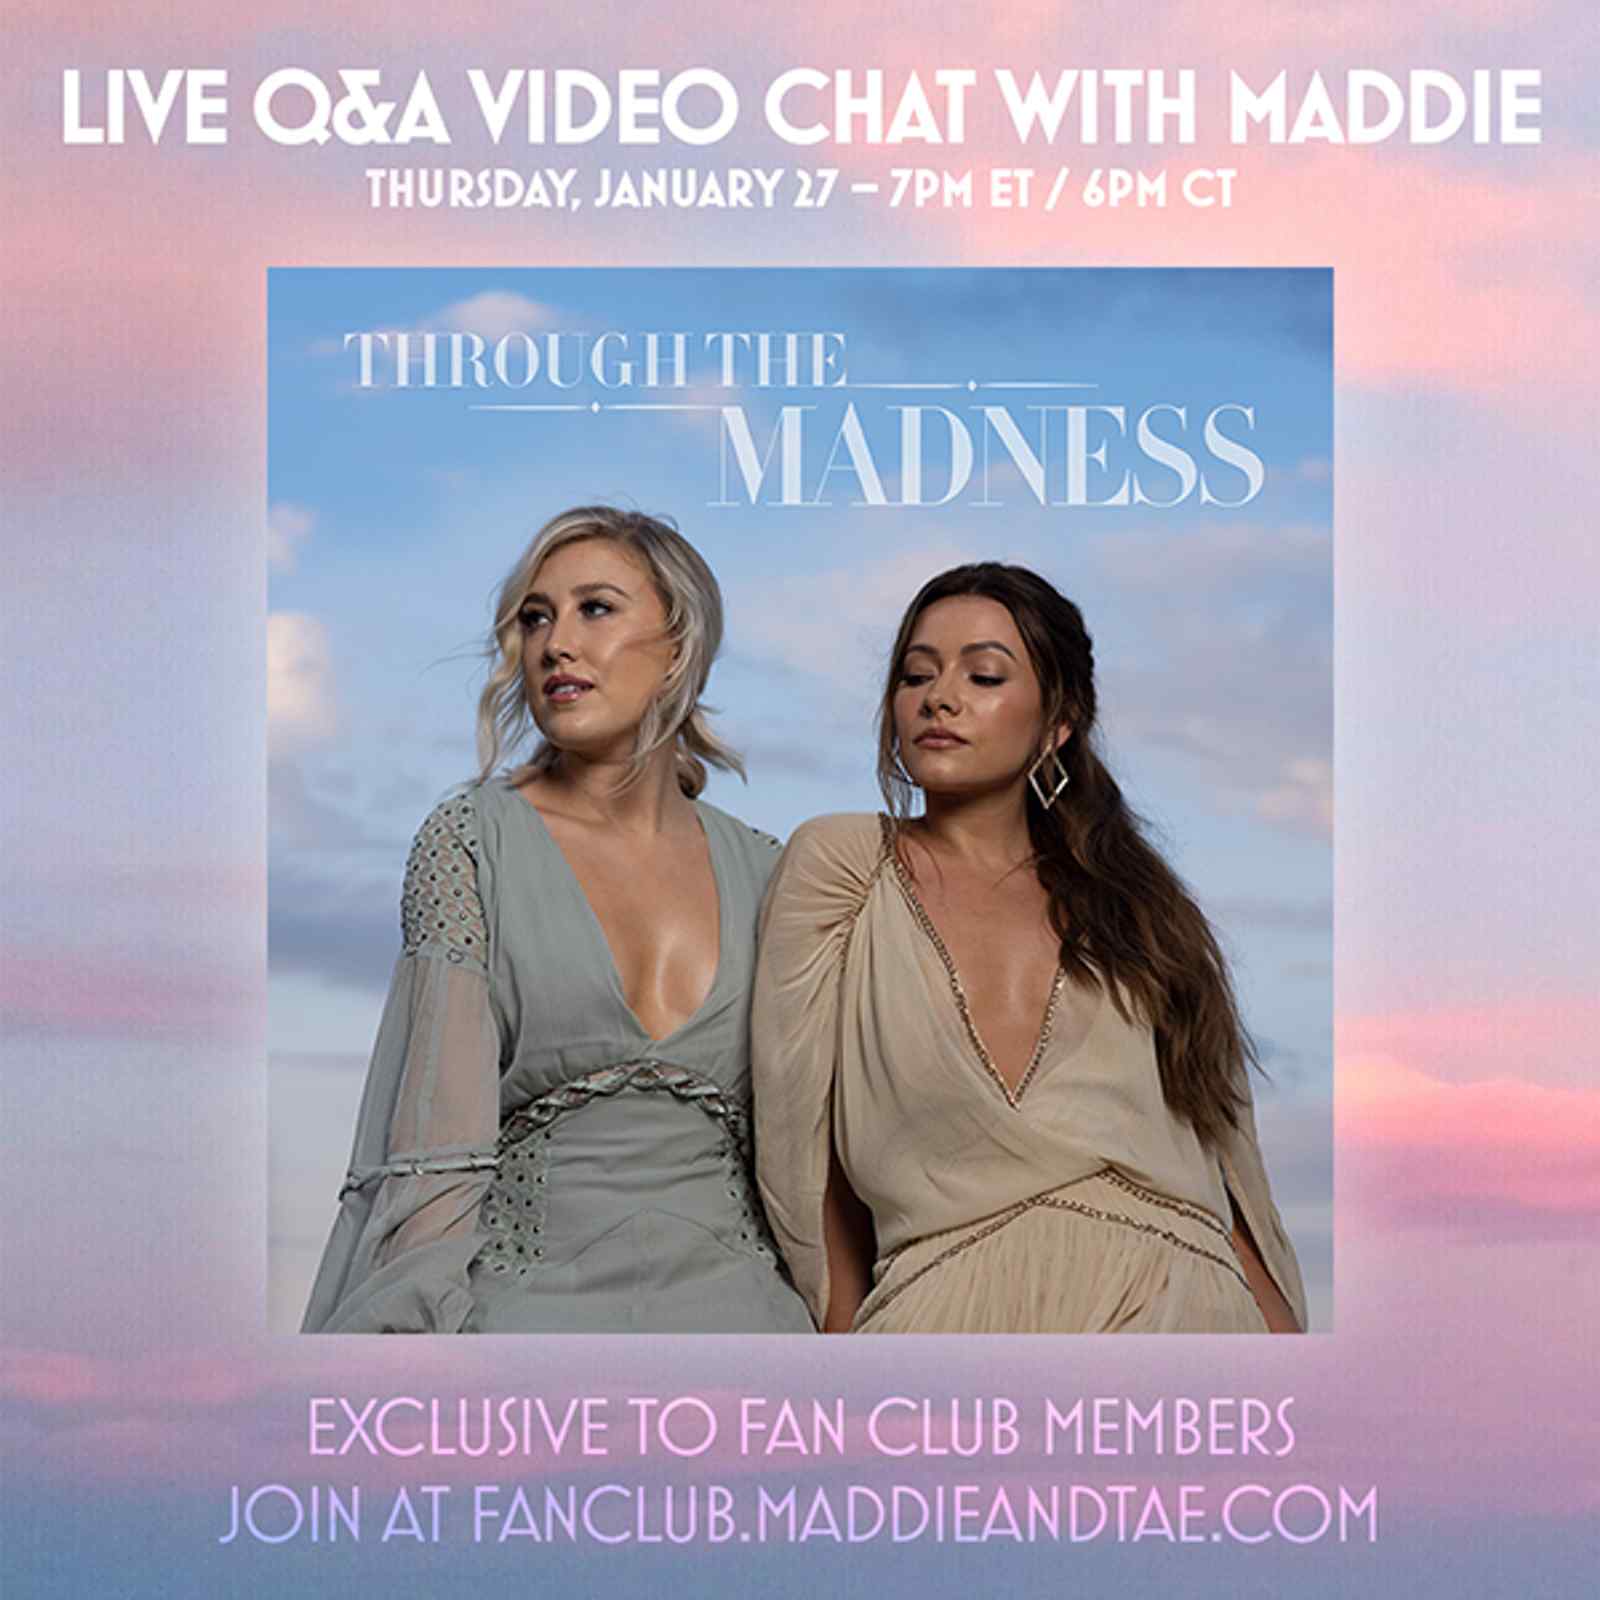 Fan Club Exclusive: Q&A Live Chat with Maddie - Thursday, January 27 @ 6PM CT